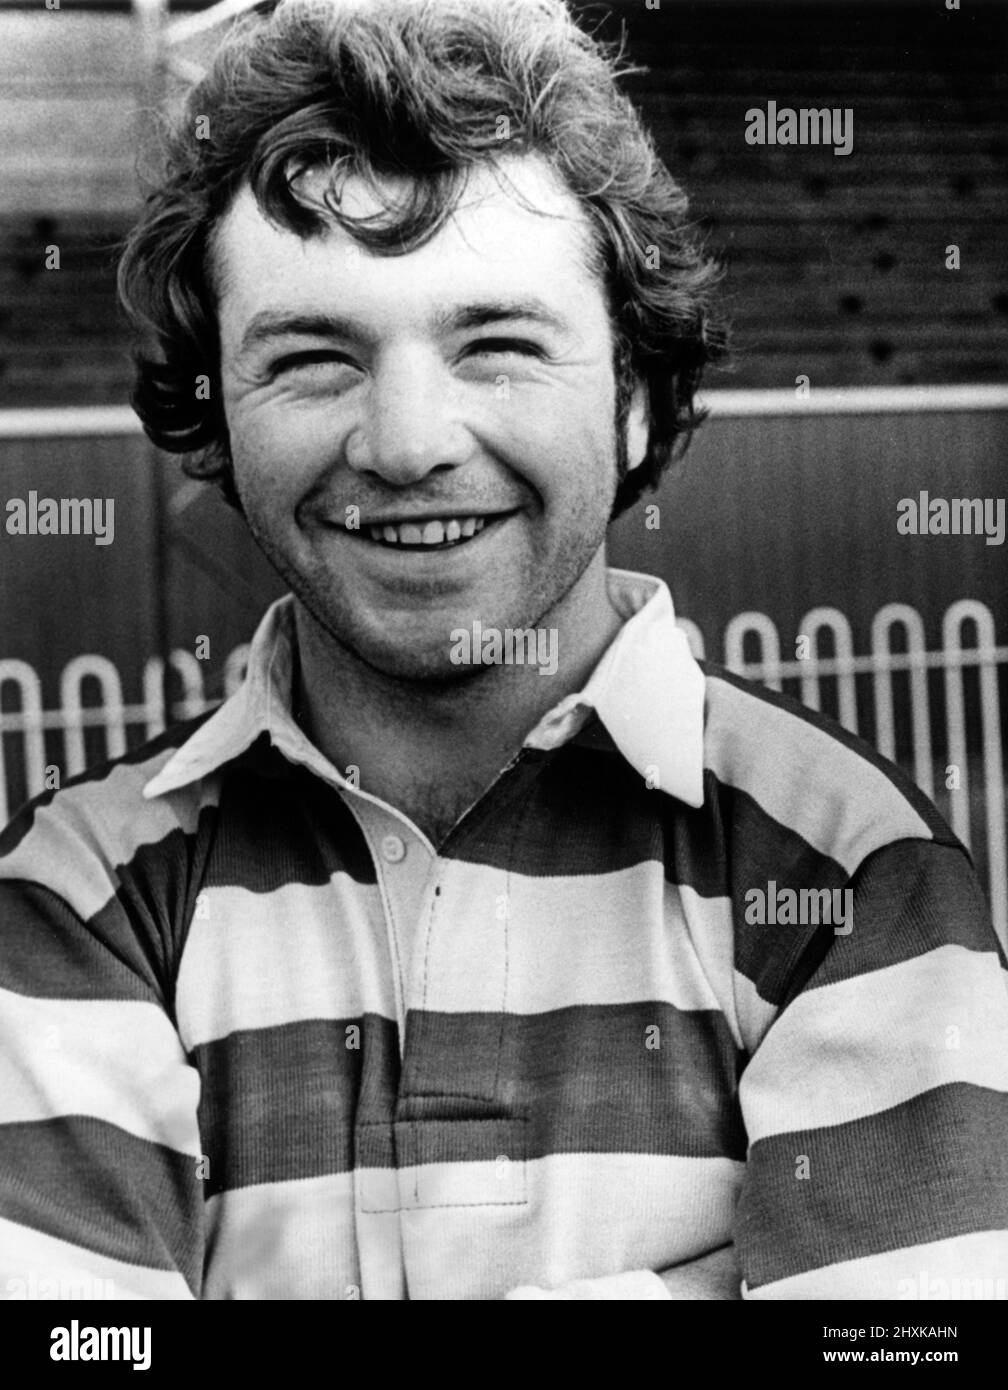 Tommy Nelmes, Huddersfield Giants Rugby League Player, 19th August 1977. Stock Photo